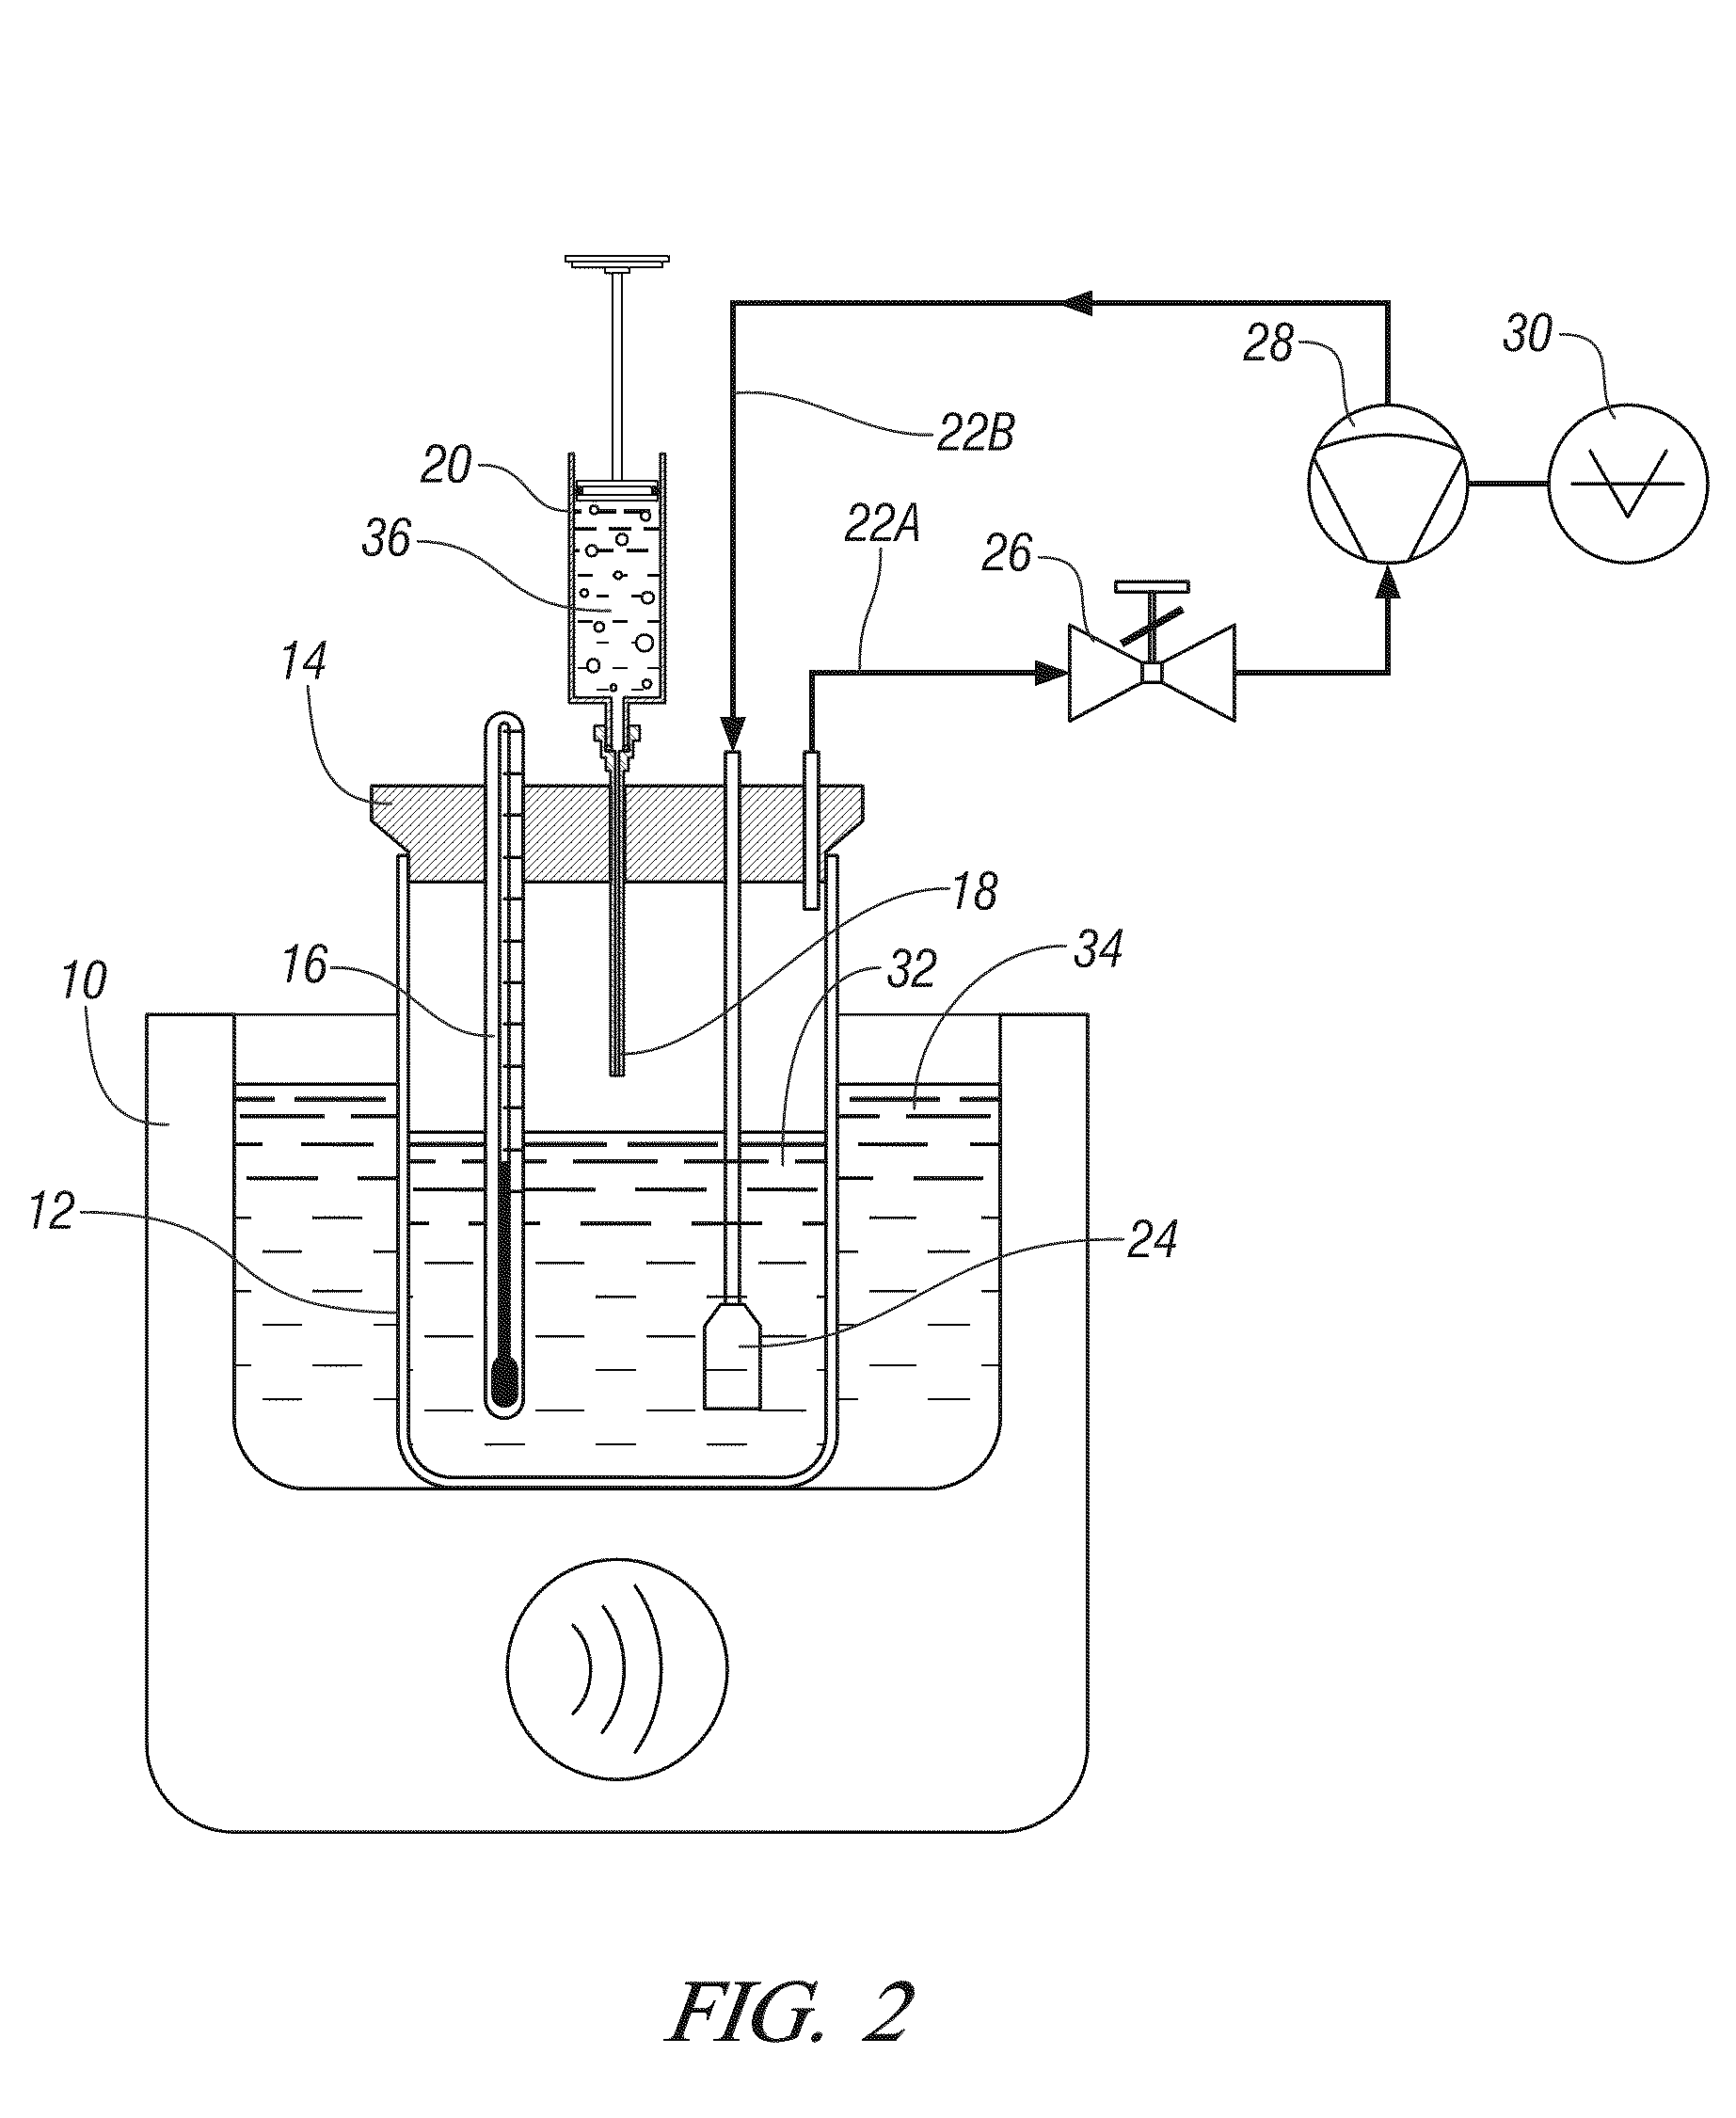 Cavitation process for products from precursor halides